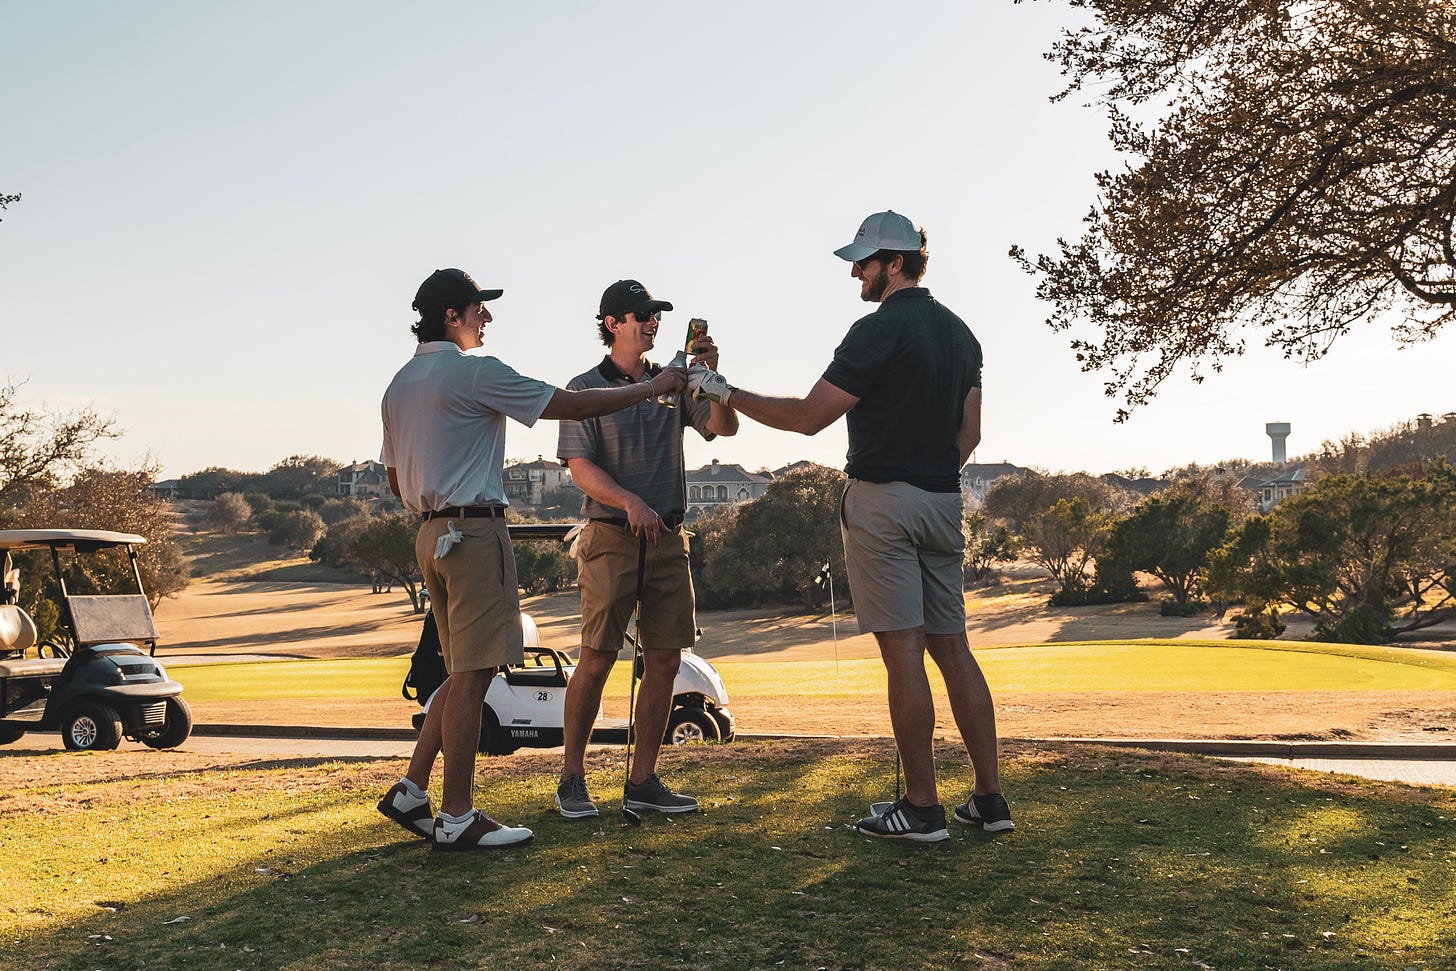 Three men, all appear to be white, enjoying a can of beer after a round of golf. Maybe they also made a deal, it's hard to say.